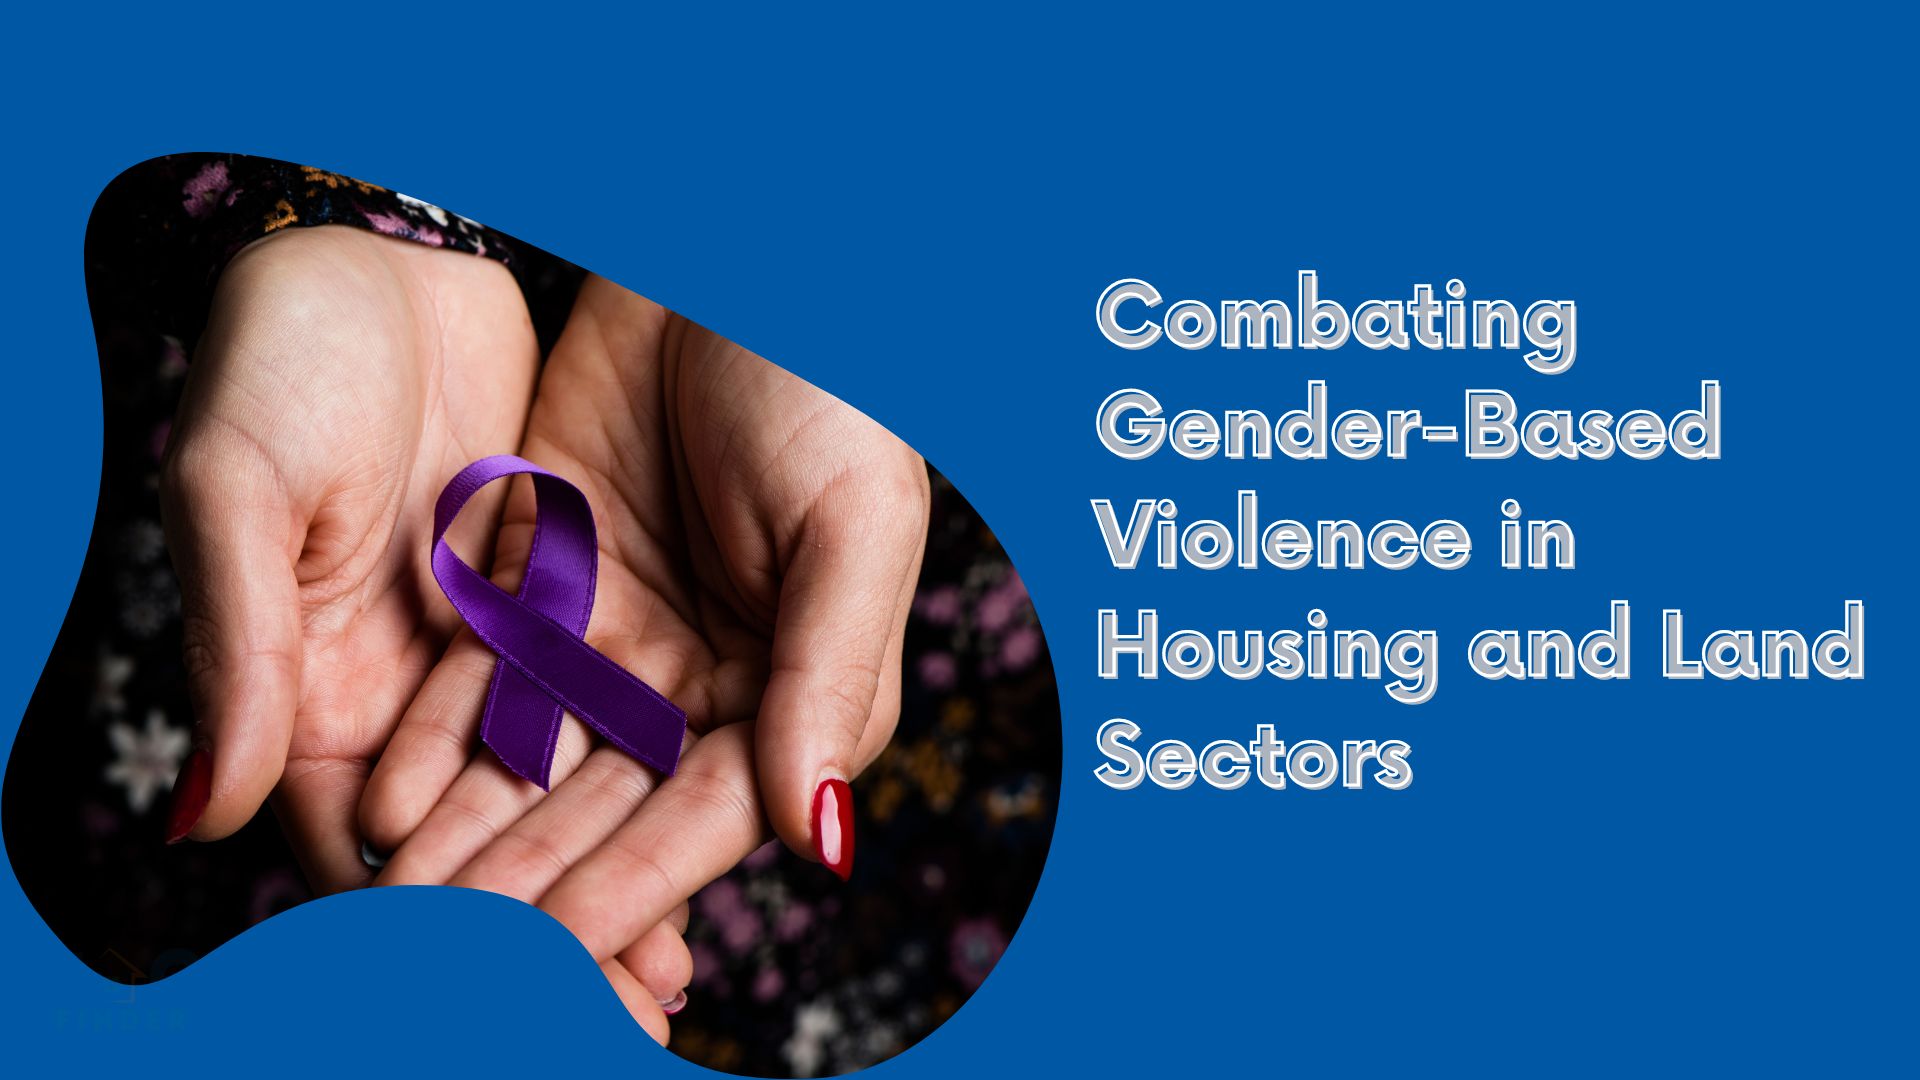 Empowering Safe Communities: Tech-Driven Solutions to Combat Gender-Based Violence in Housing and Land Sectors